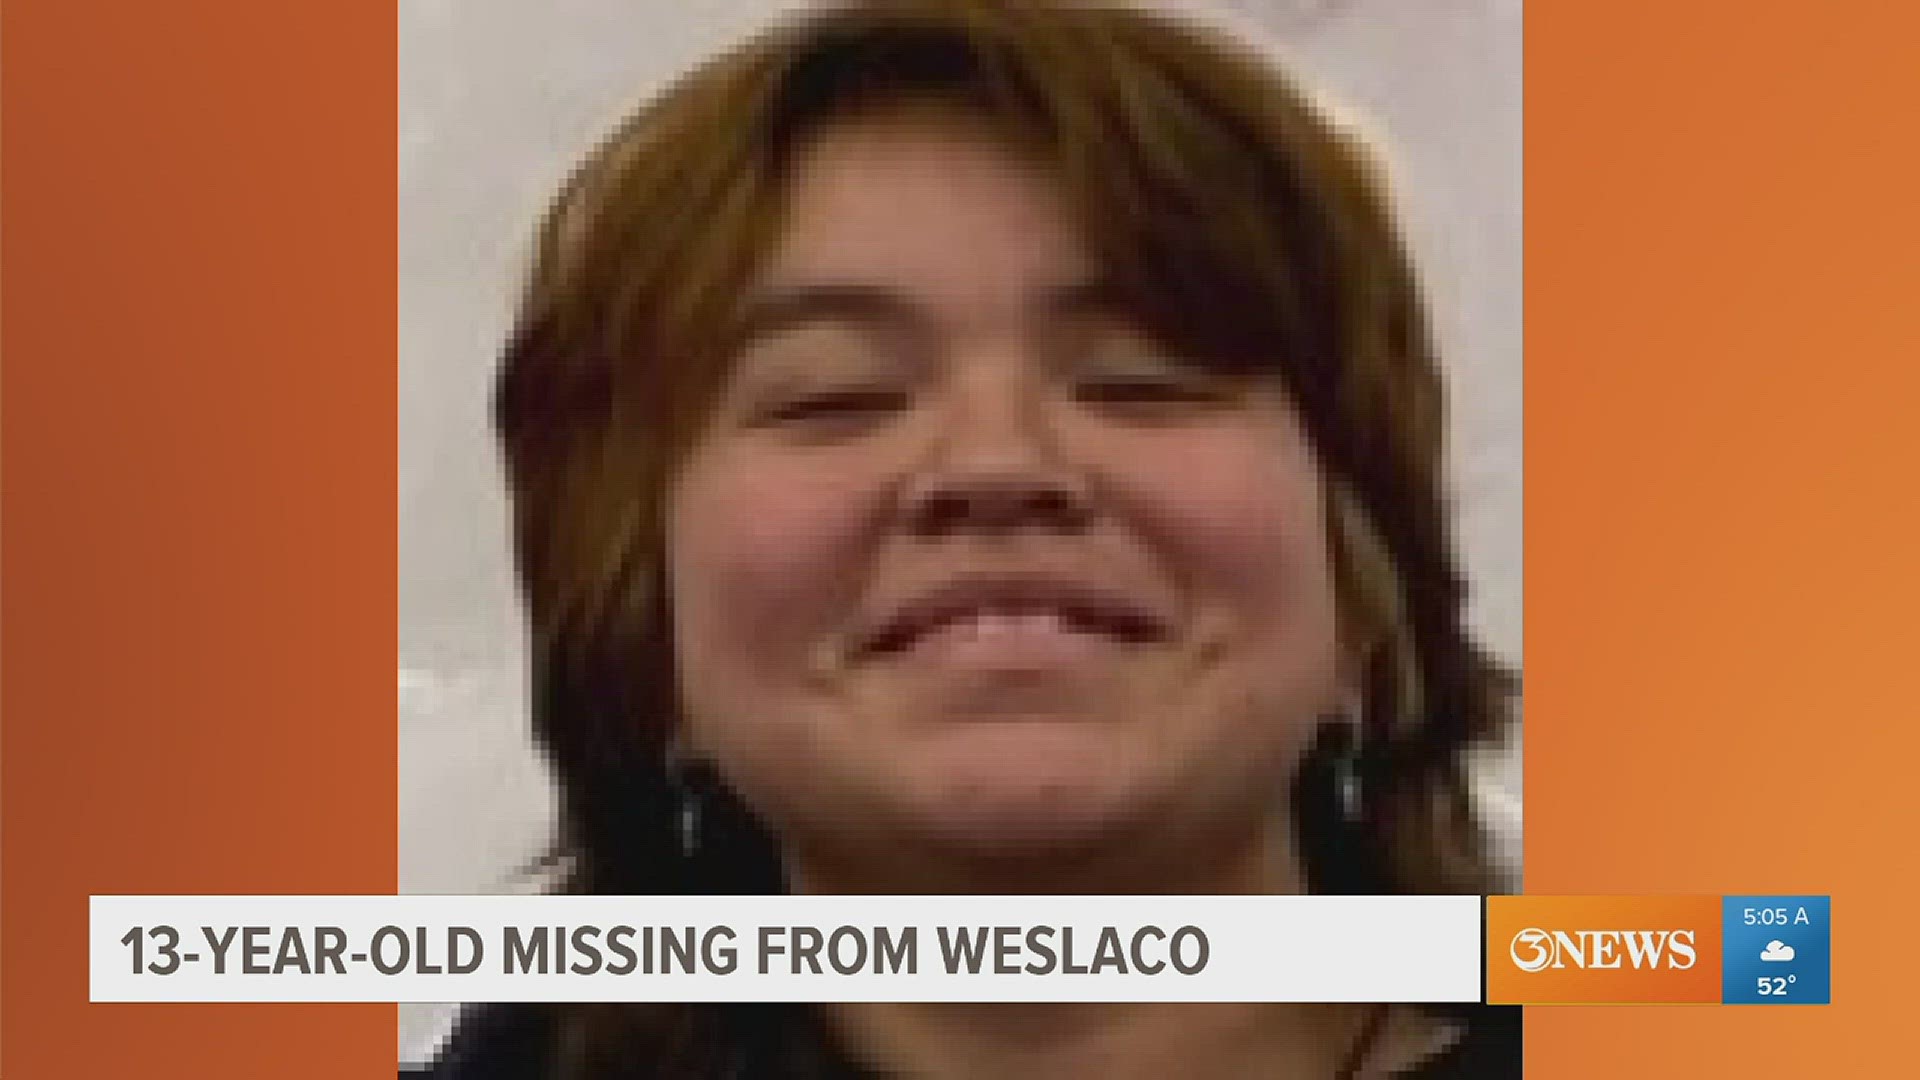 Esmeralda Mireles was last seen in Weslaco, Texas in the valley. Police believe she was last seen with 37-year-old Luis Gomez, who they say abducted her.